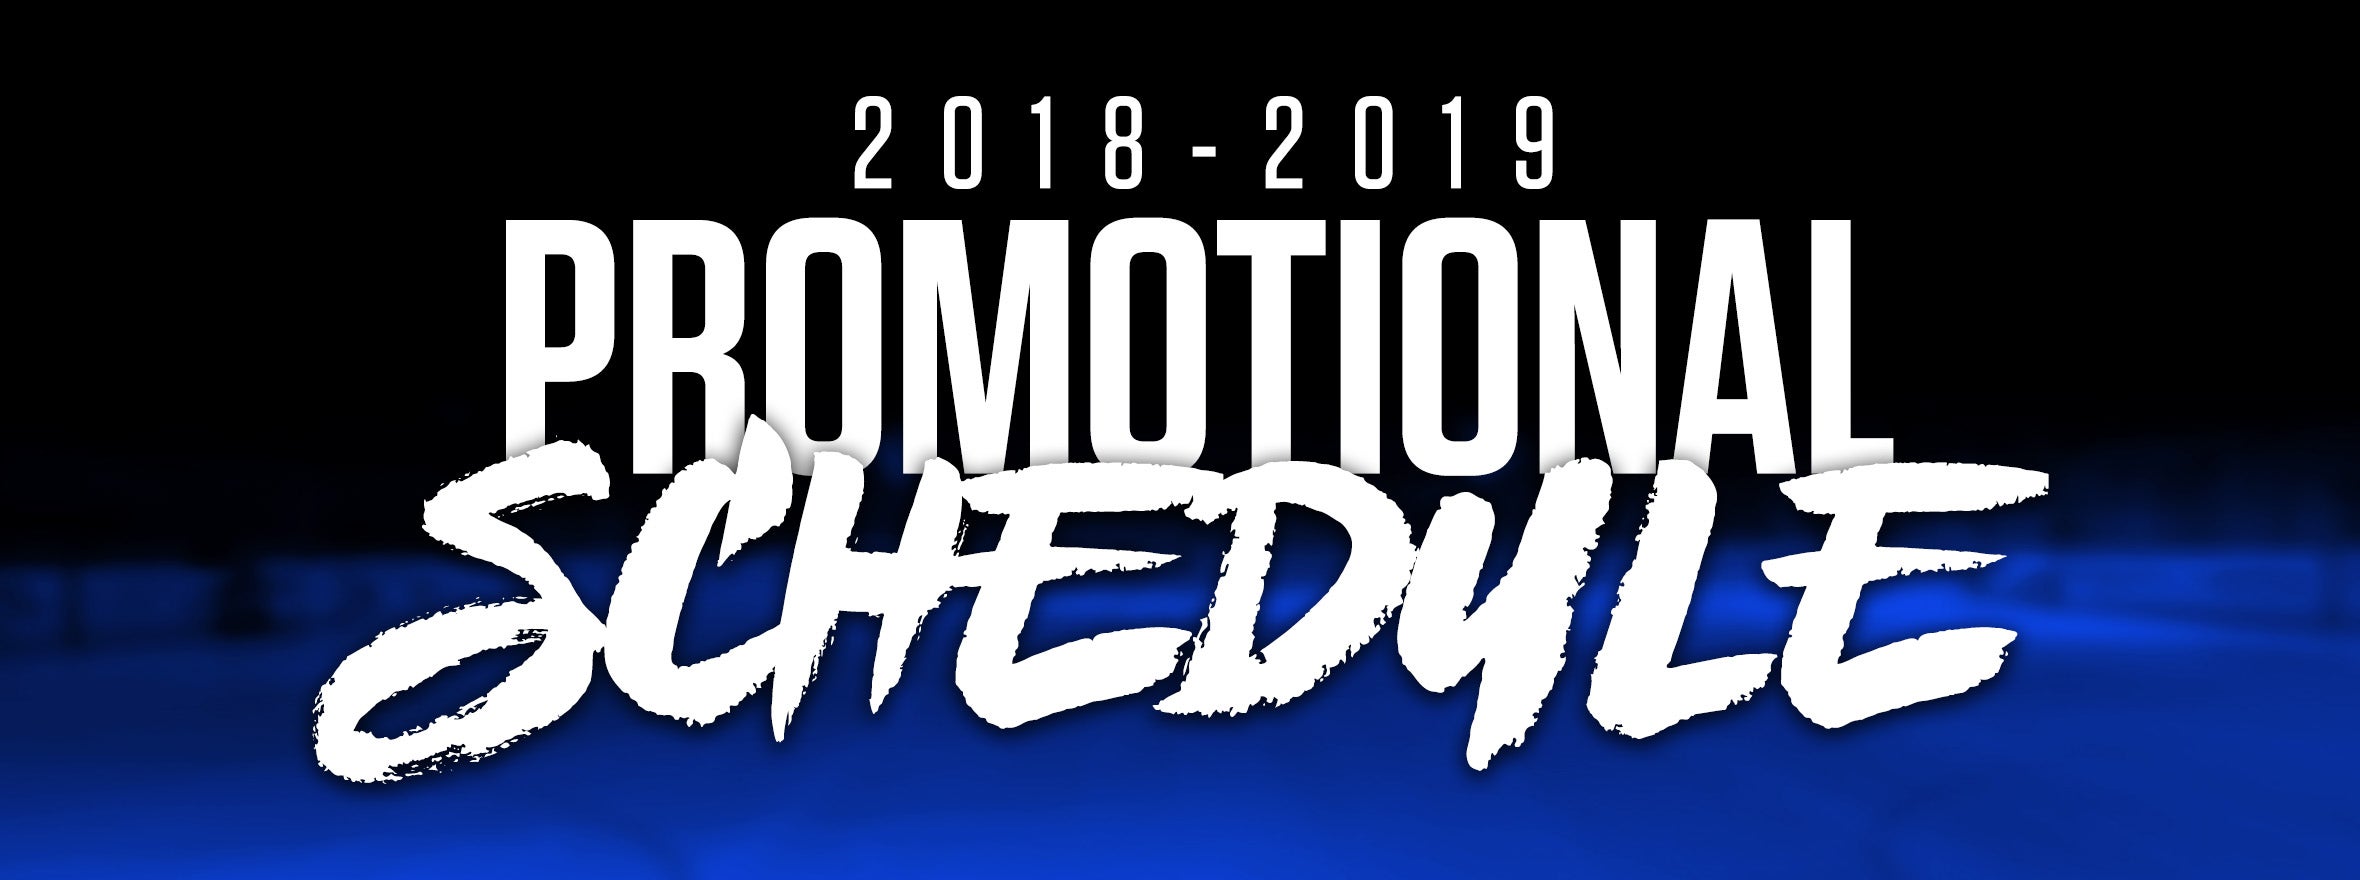 COMETS RELEASE PROMOTIONAL SCHEDULE, TICKETS ON SALE